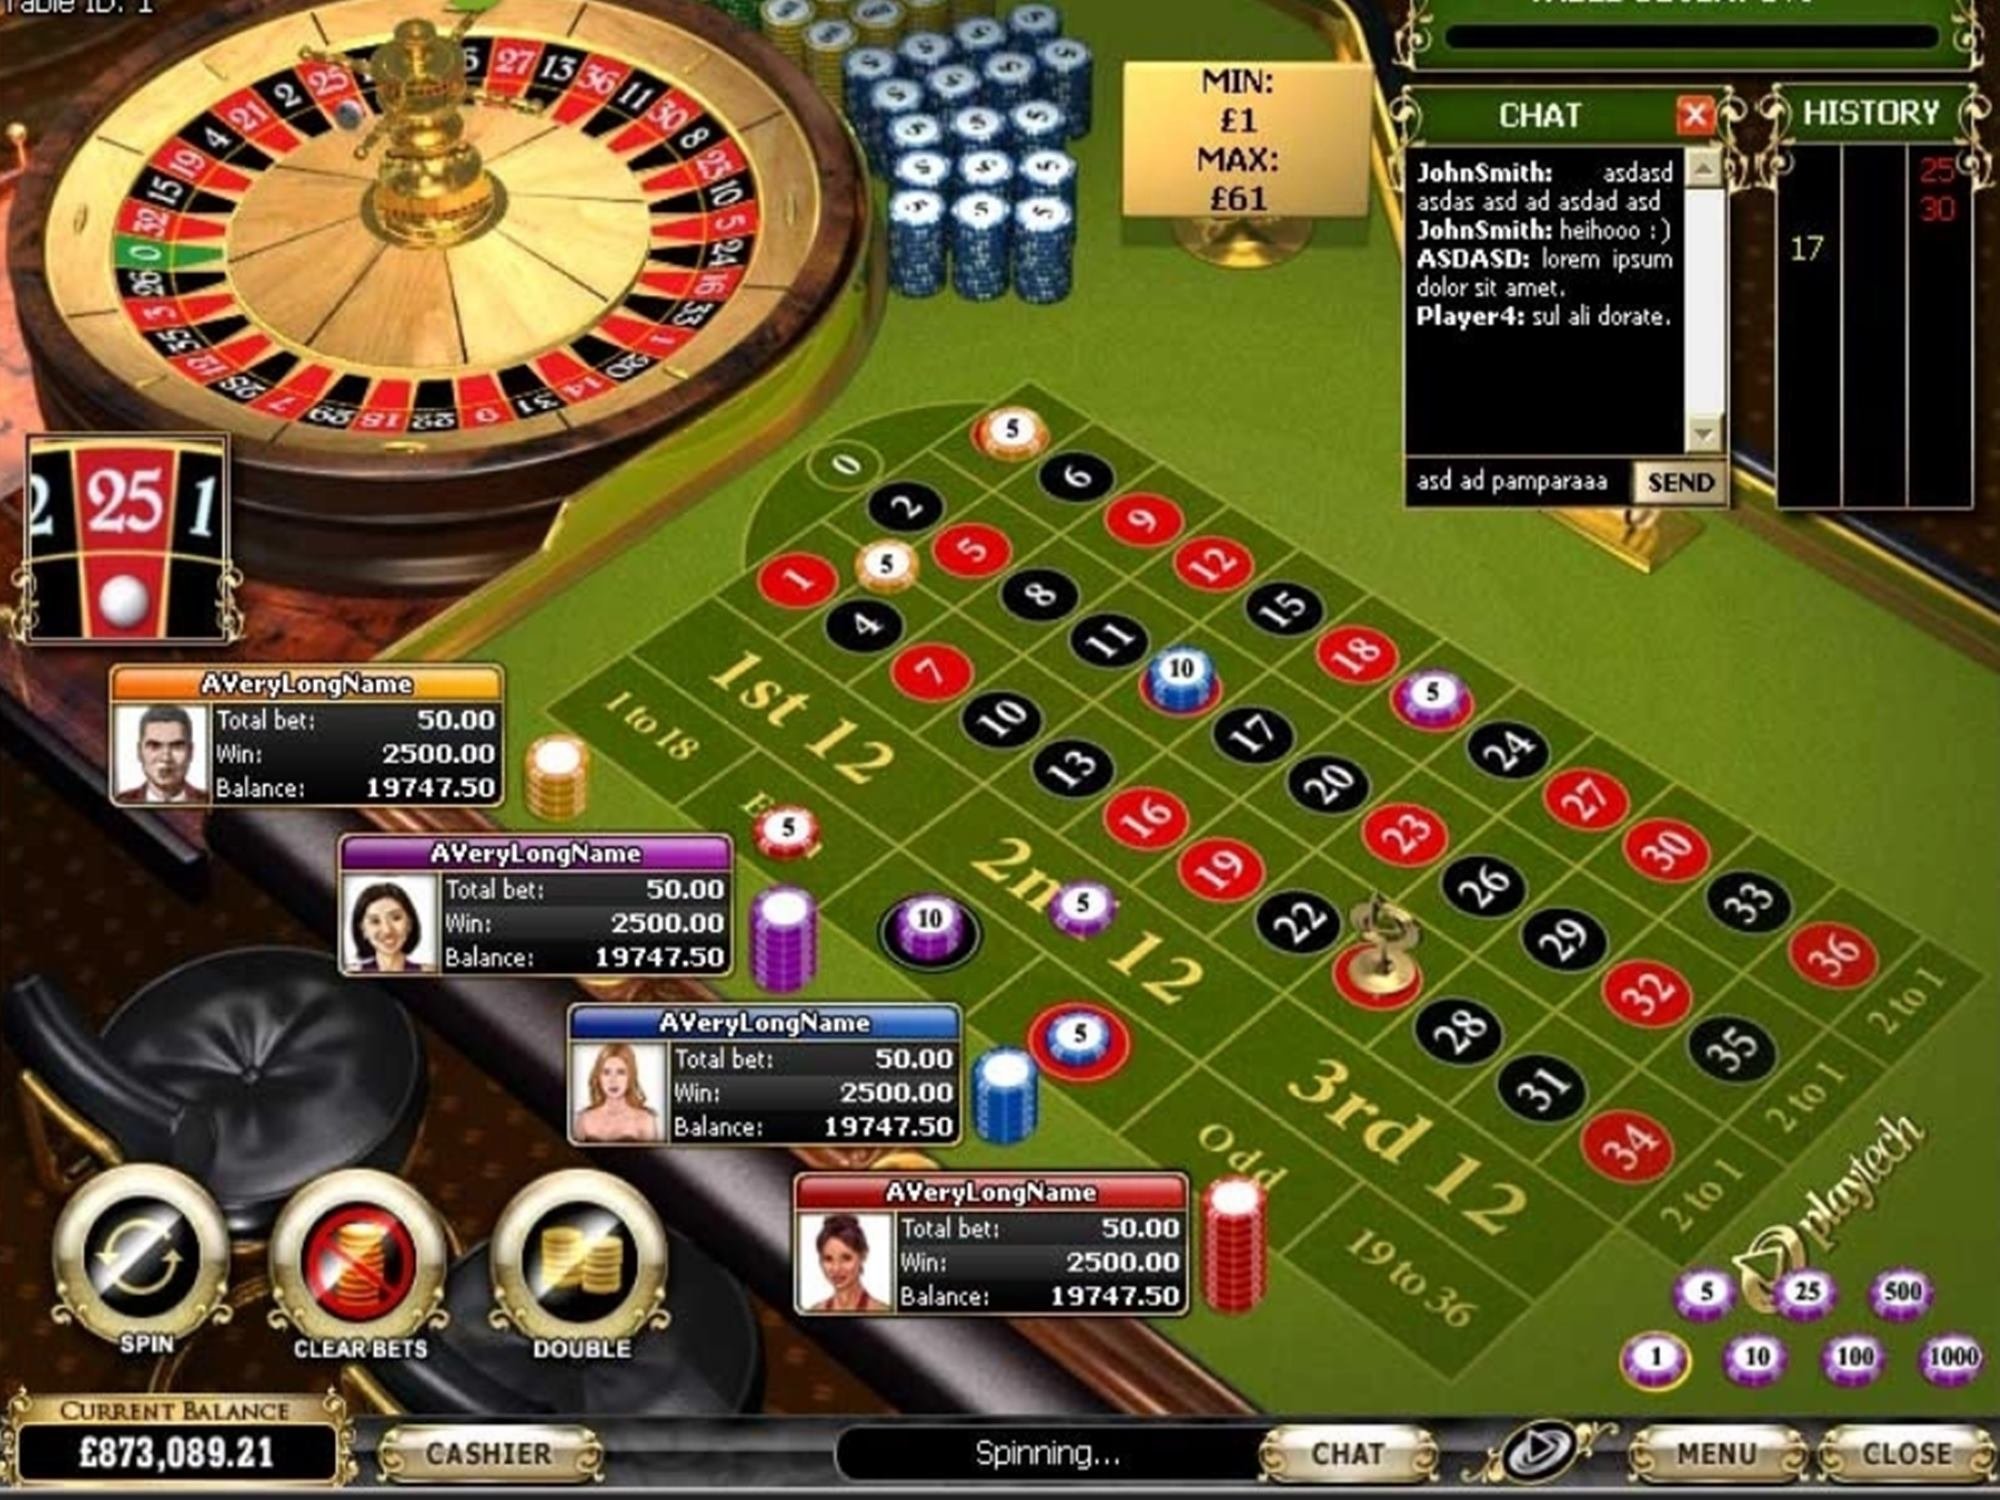 Secrets To Getting jackpot wheel no deposit bonus To Complete Tasks Quickly And Efficiently